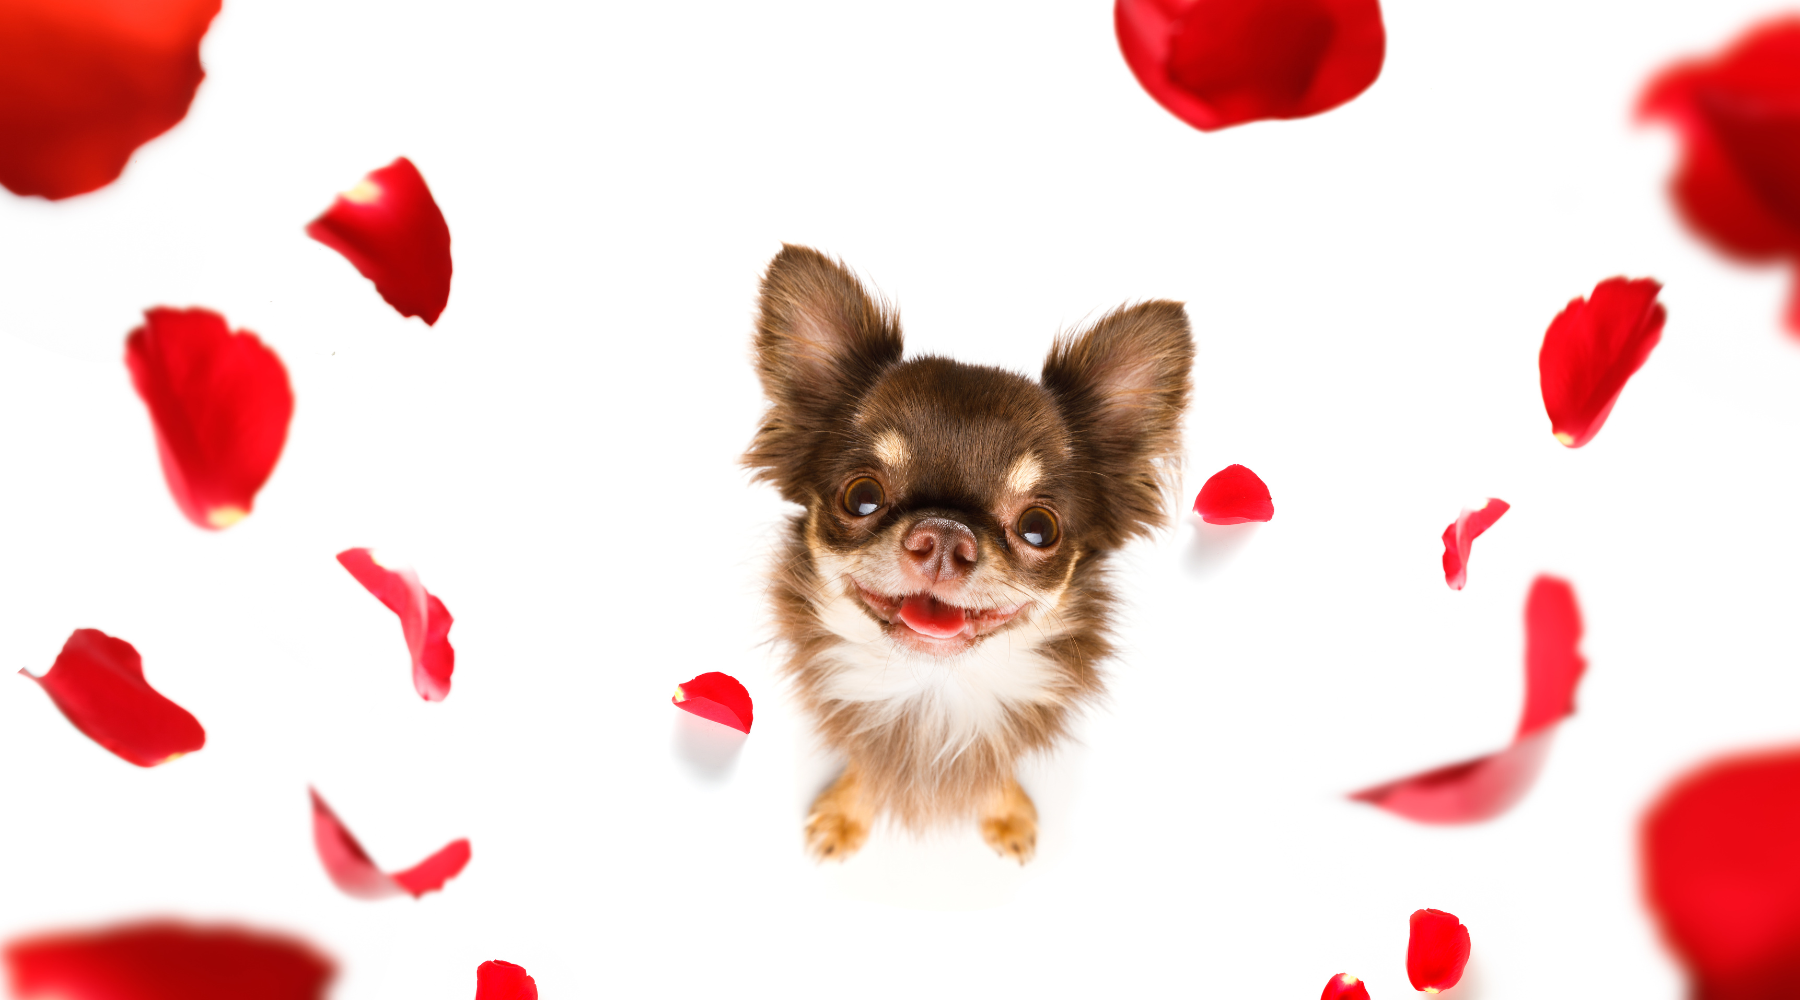 Dog with red confetti